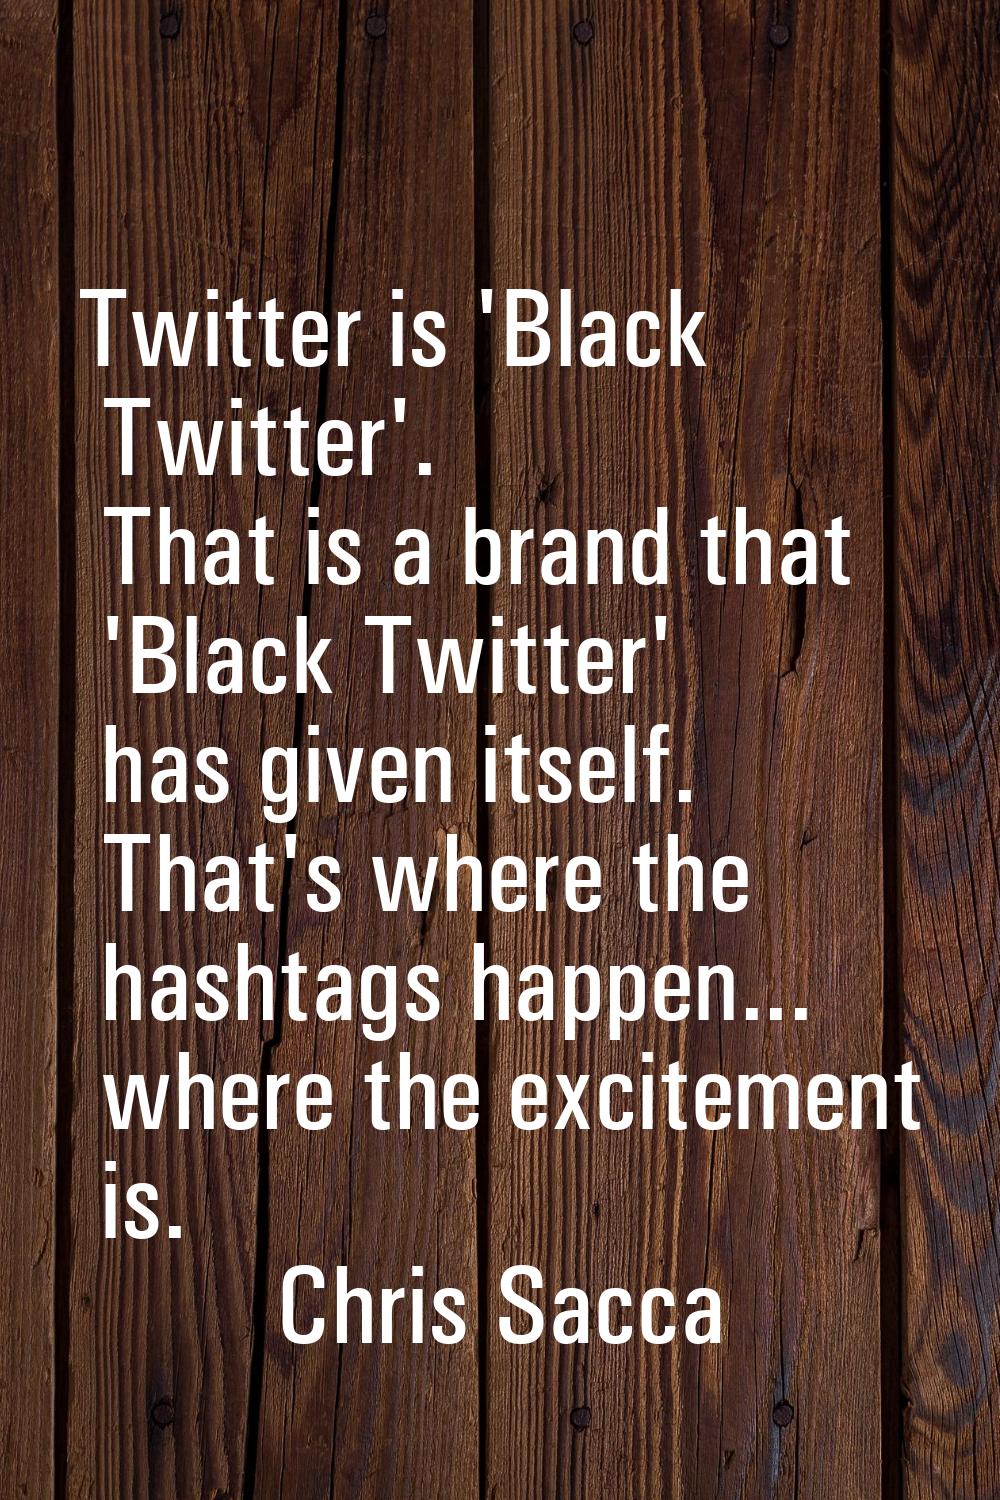 Twitter is 'Black Twitter'. That is a brand that 'Black Twitter' has given itself. That's where the